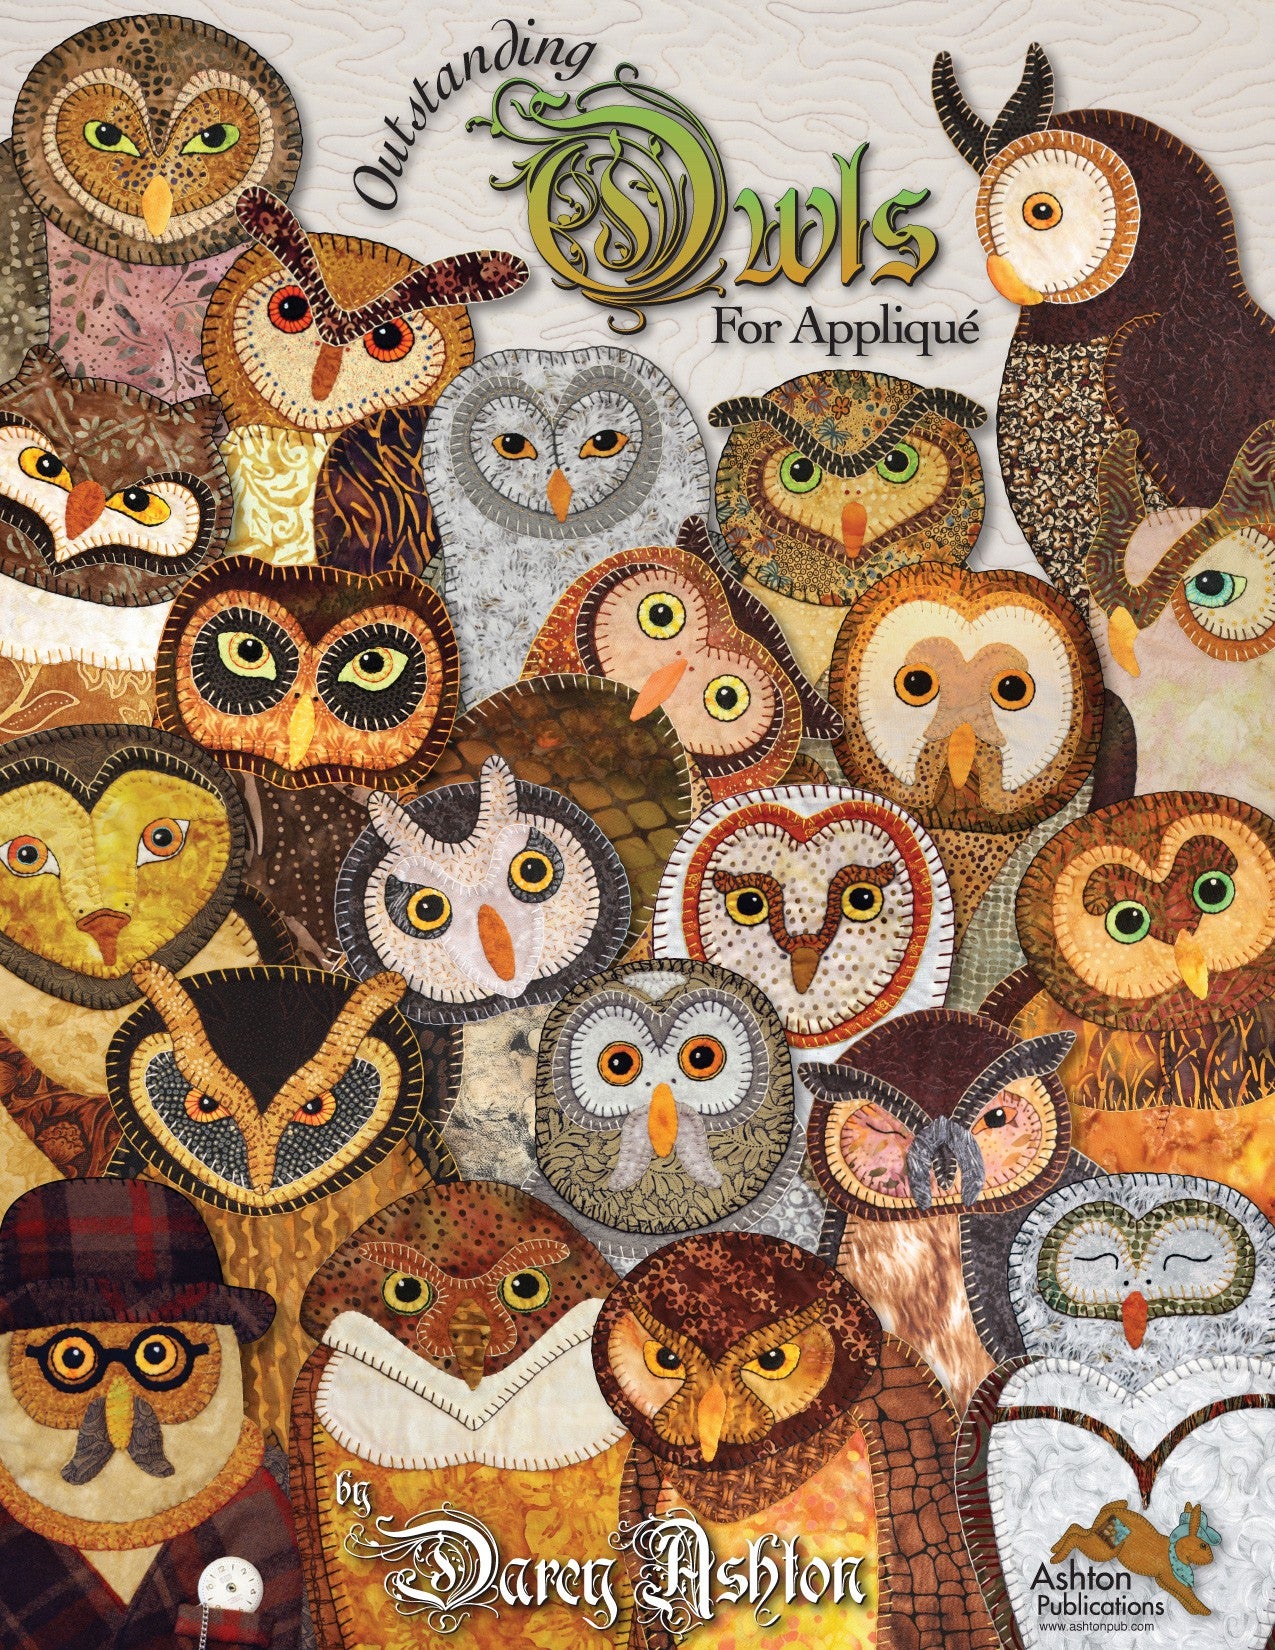 Outstanding Owls For Applique Quilt Pattern Book by Darcy Ashton of Ashton Publications